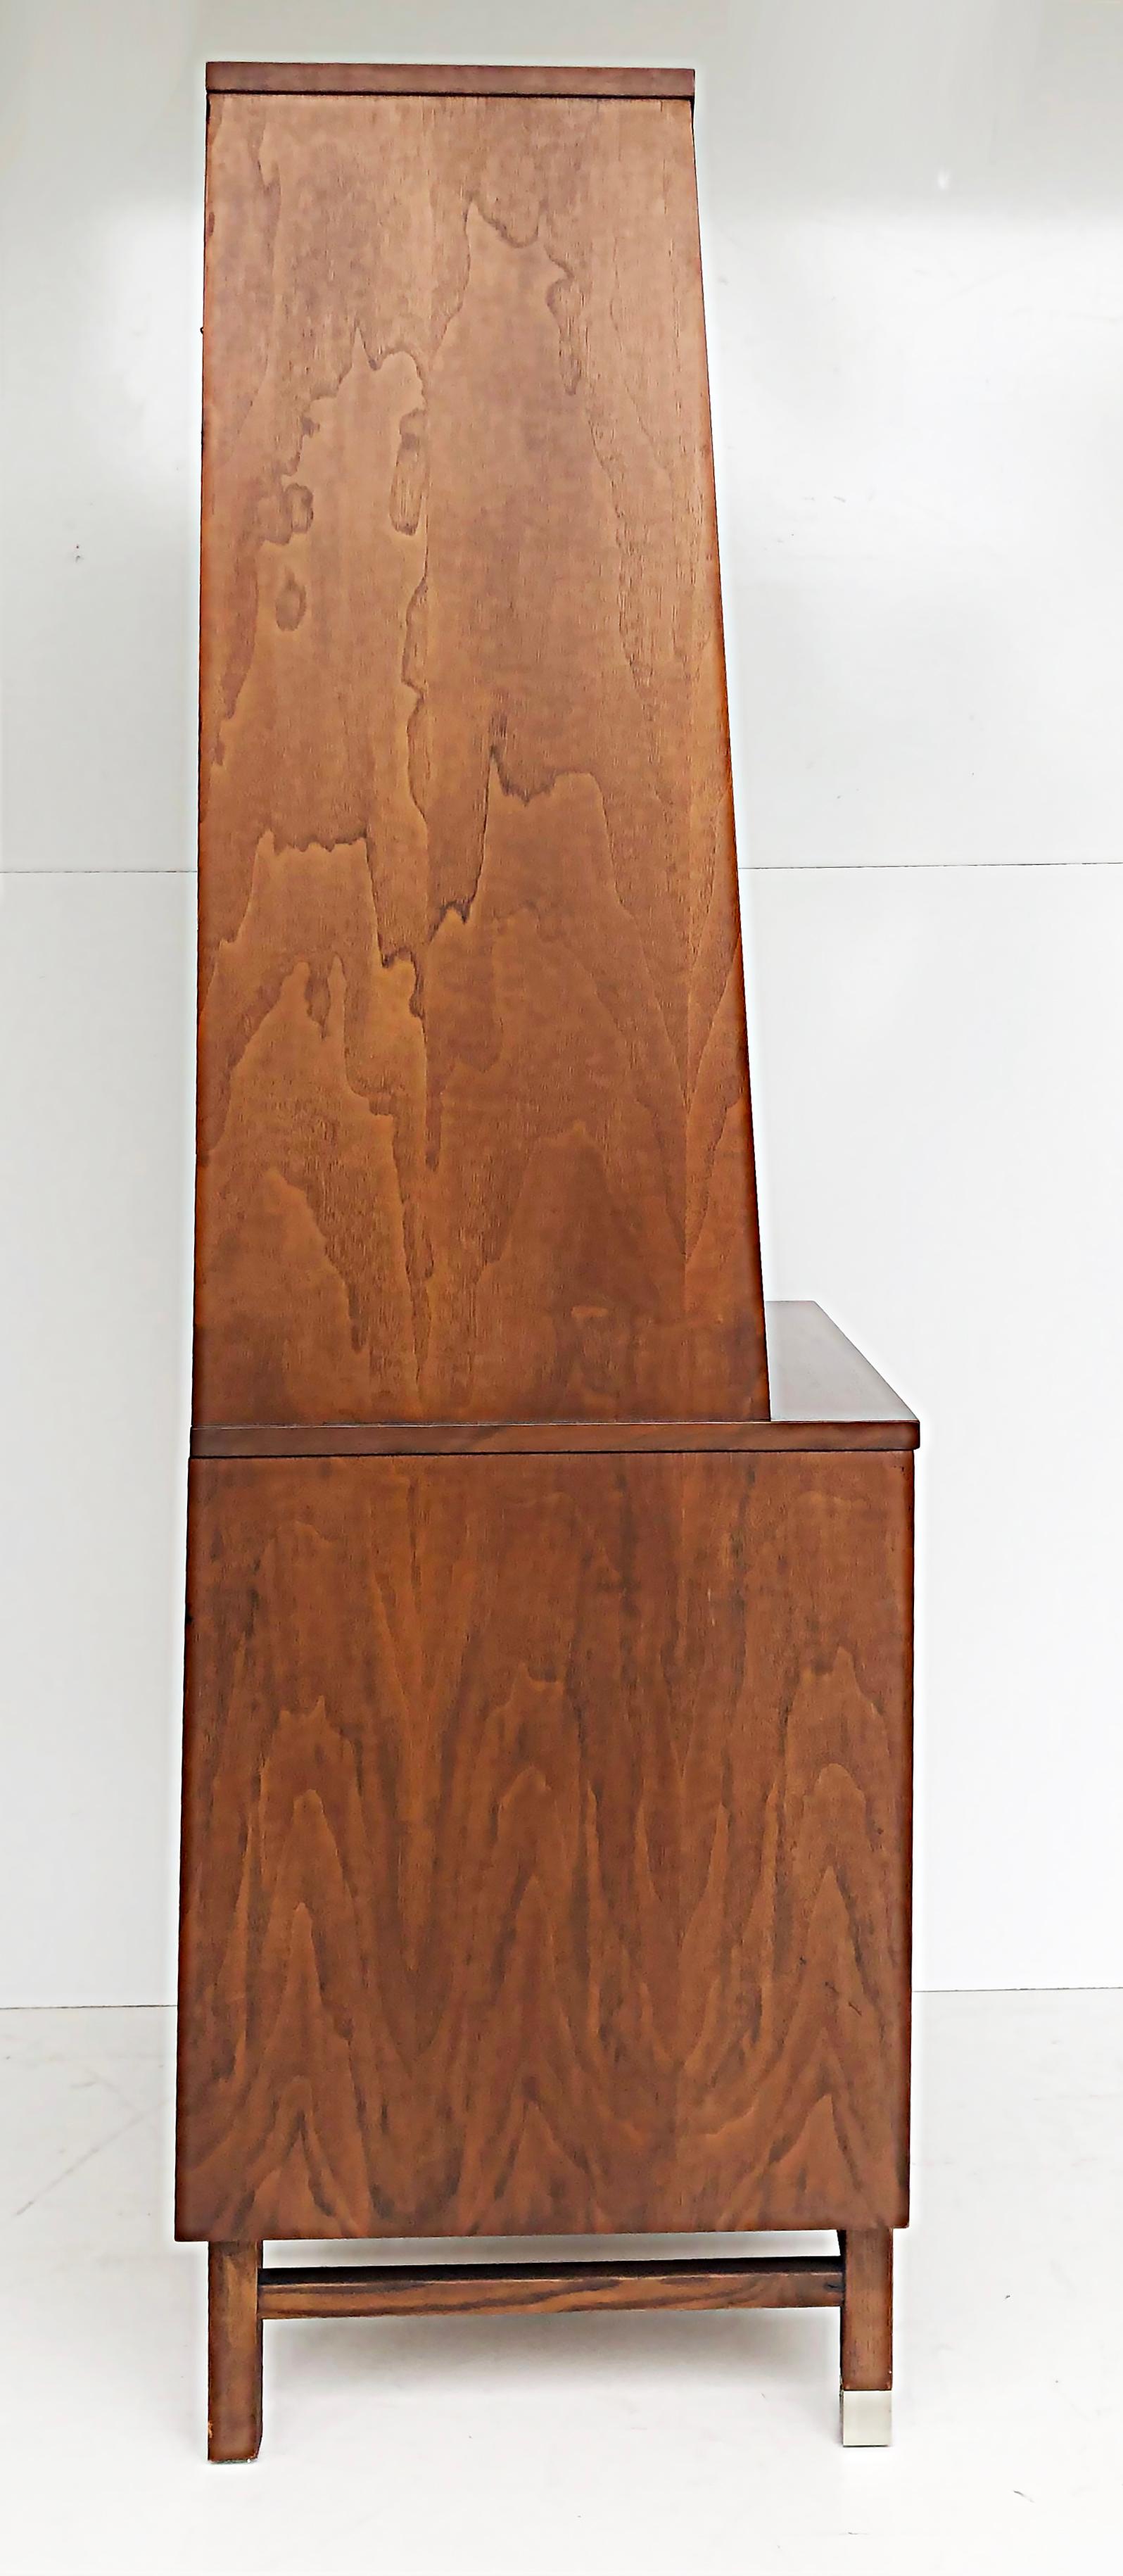 20th Century Stanley Furniture Mid-Century Walnut Rosewood China Cabinet by H Paul Browning